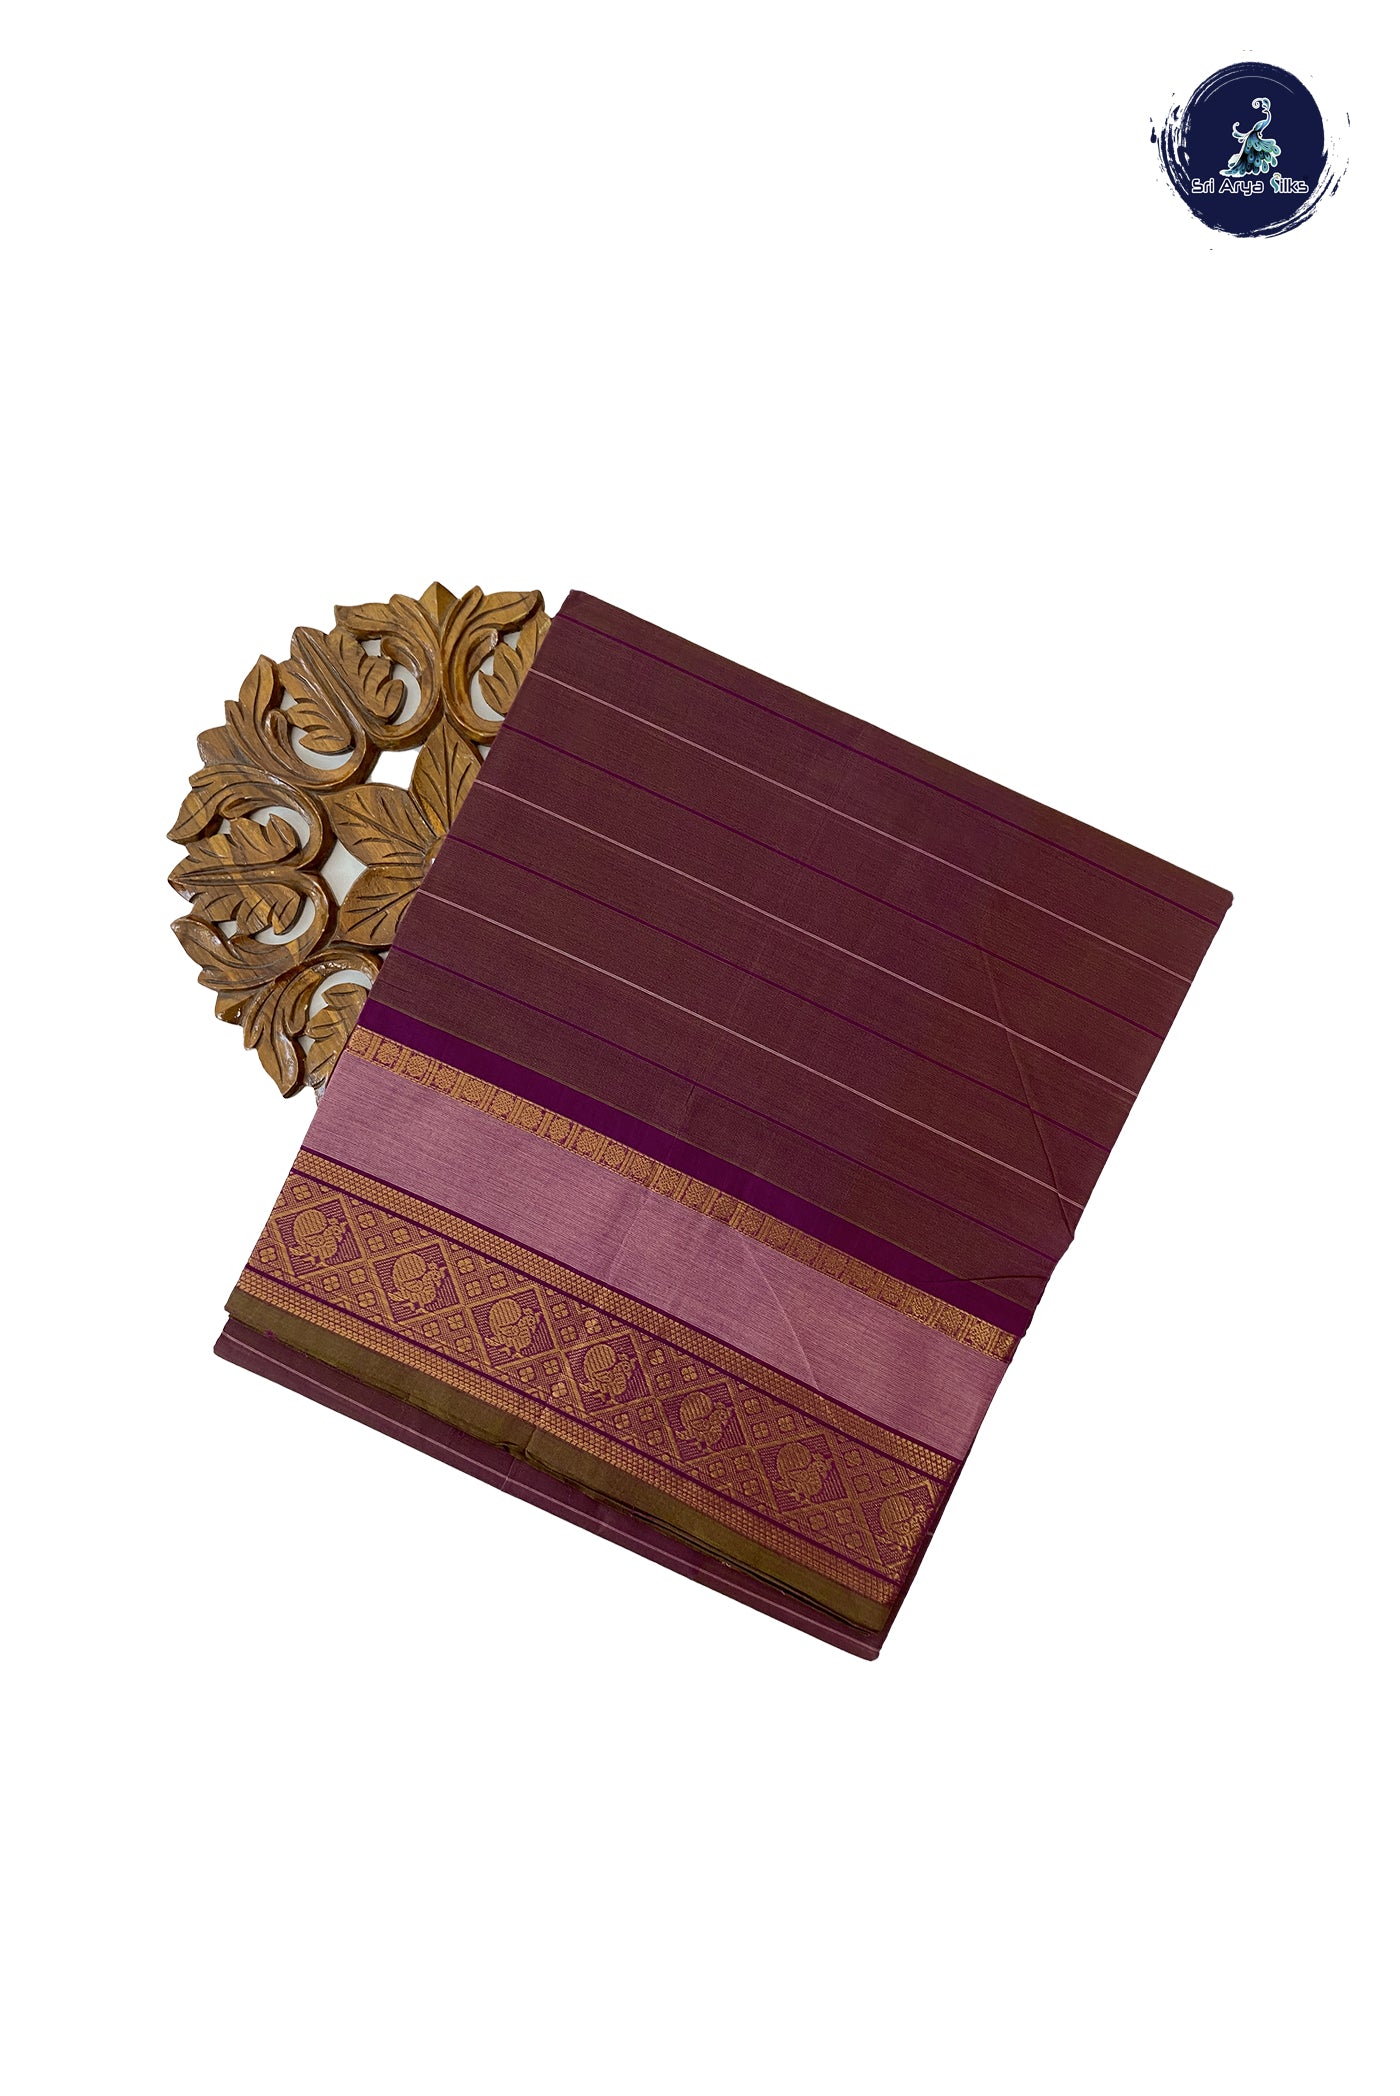 Dual Tone Brown Cotton Saree With Stripes Pattern